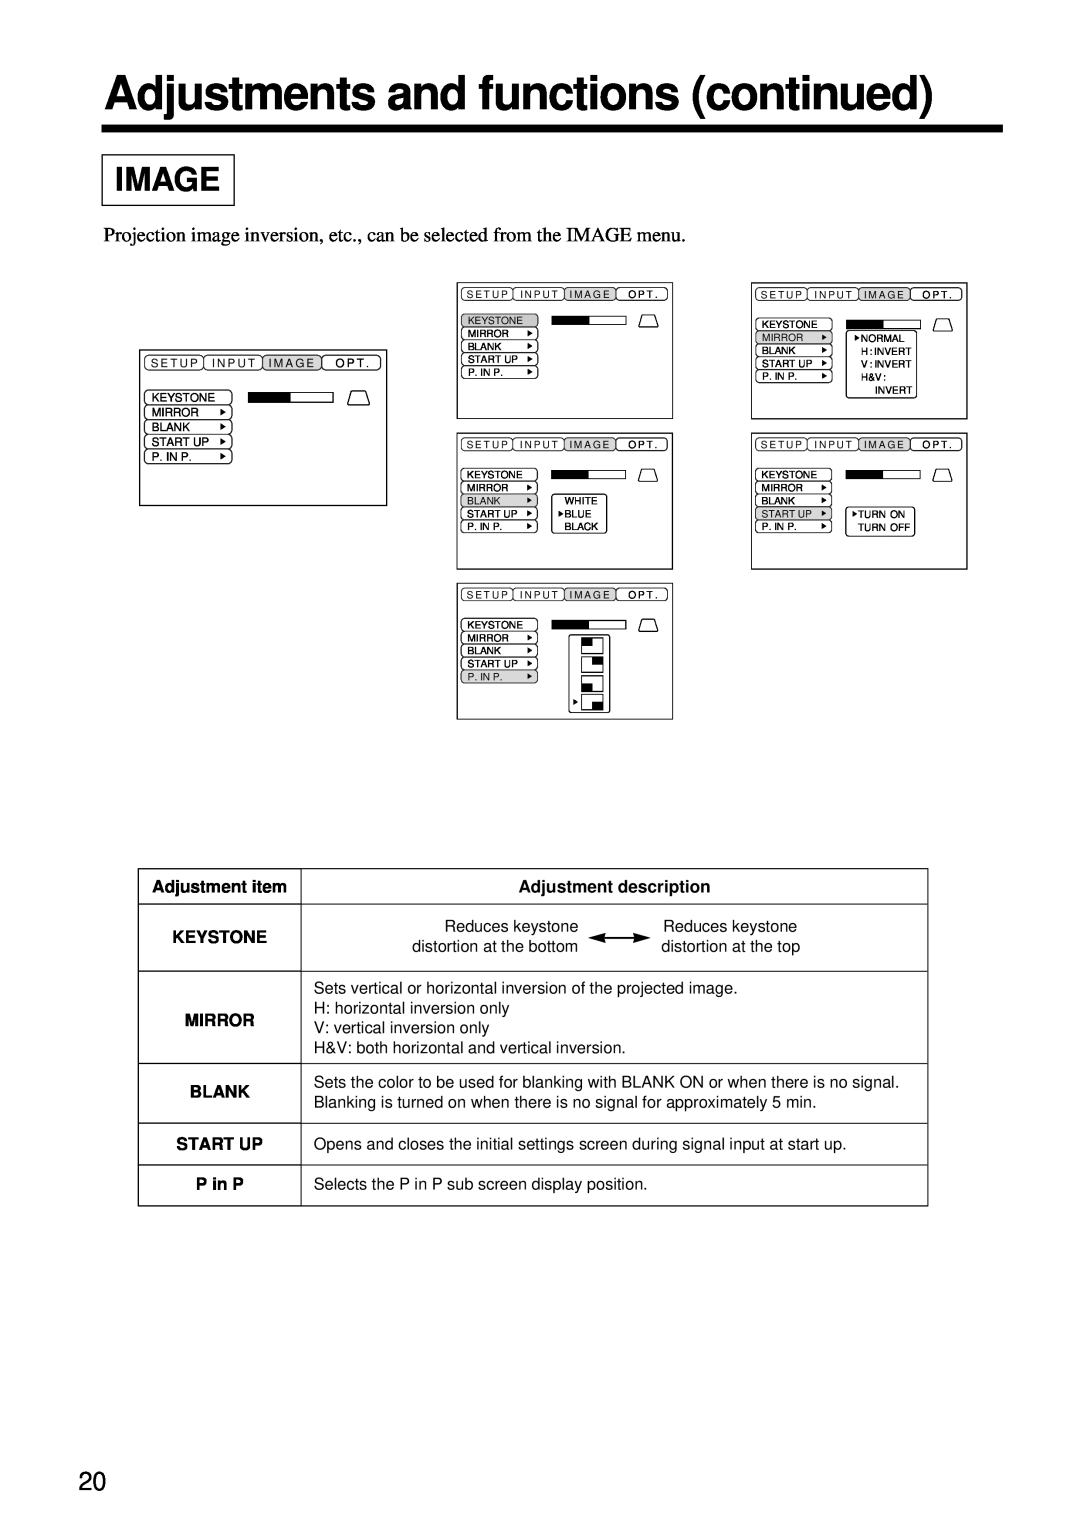 Hitachi CP-X960W user manual Image, Adjustments and functions continued, Mirror, Start Up, P in P 